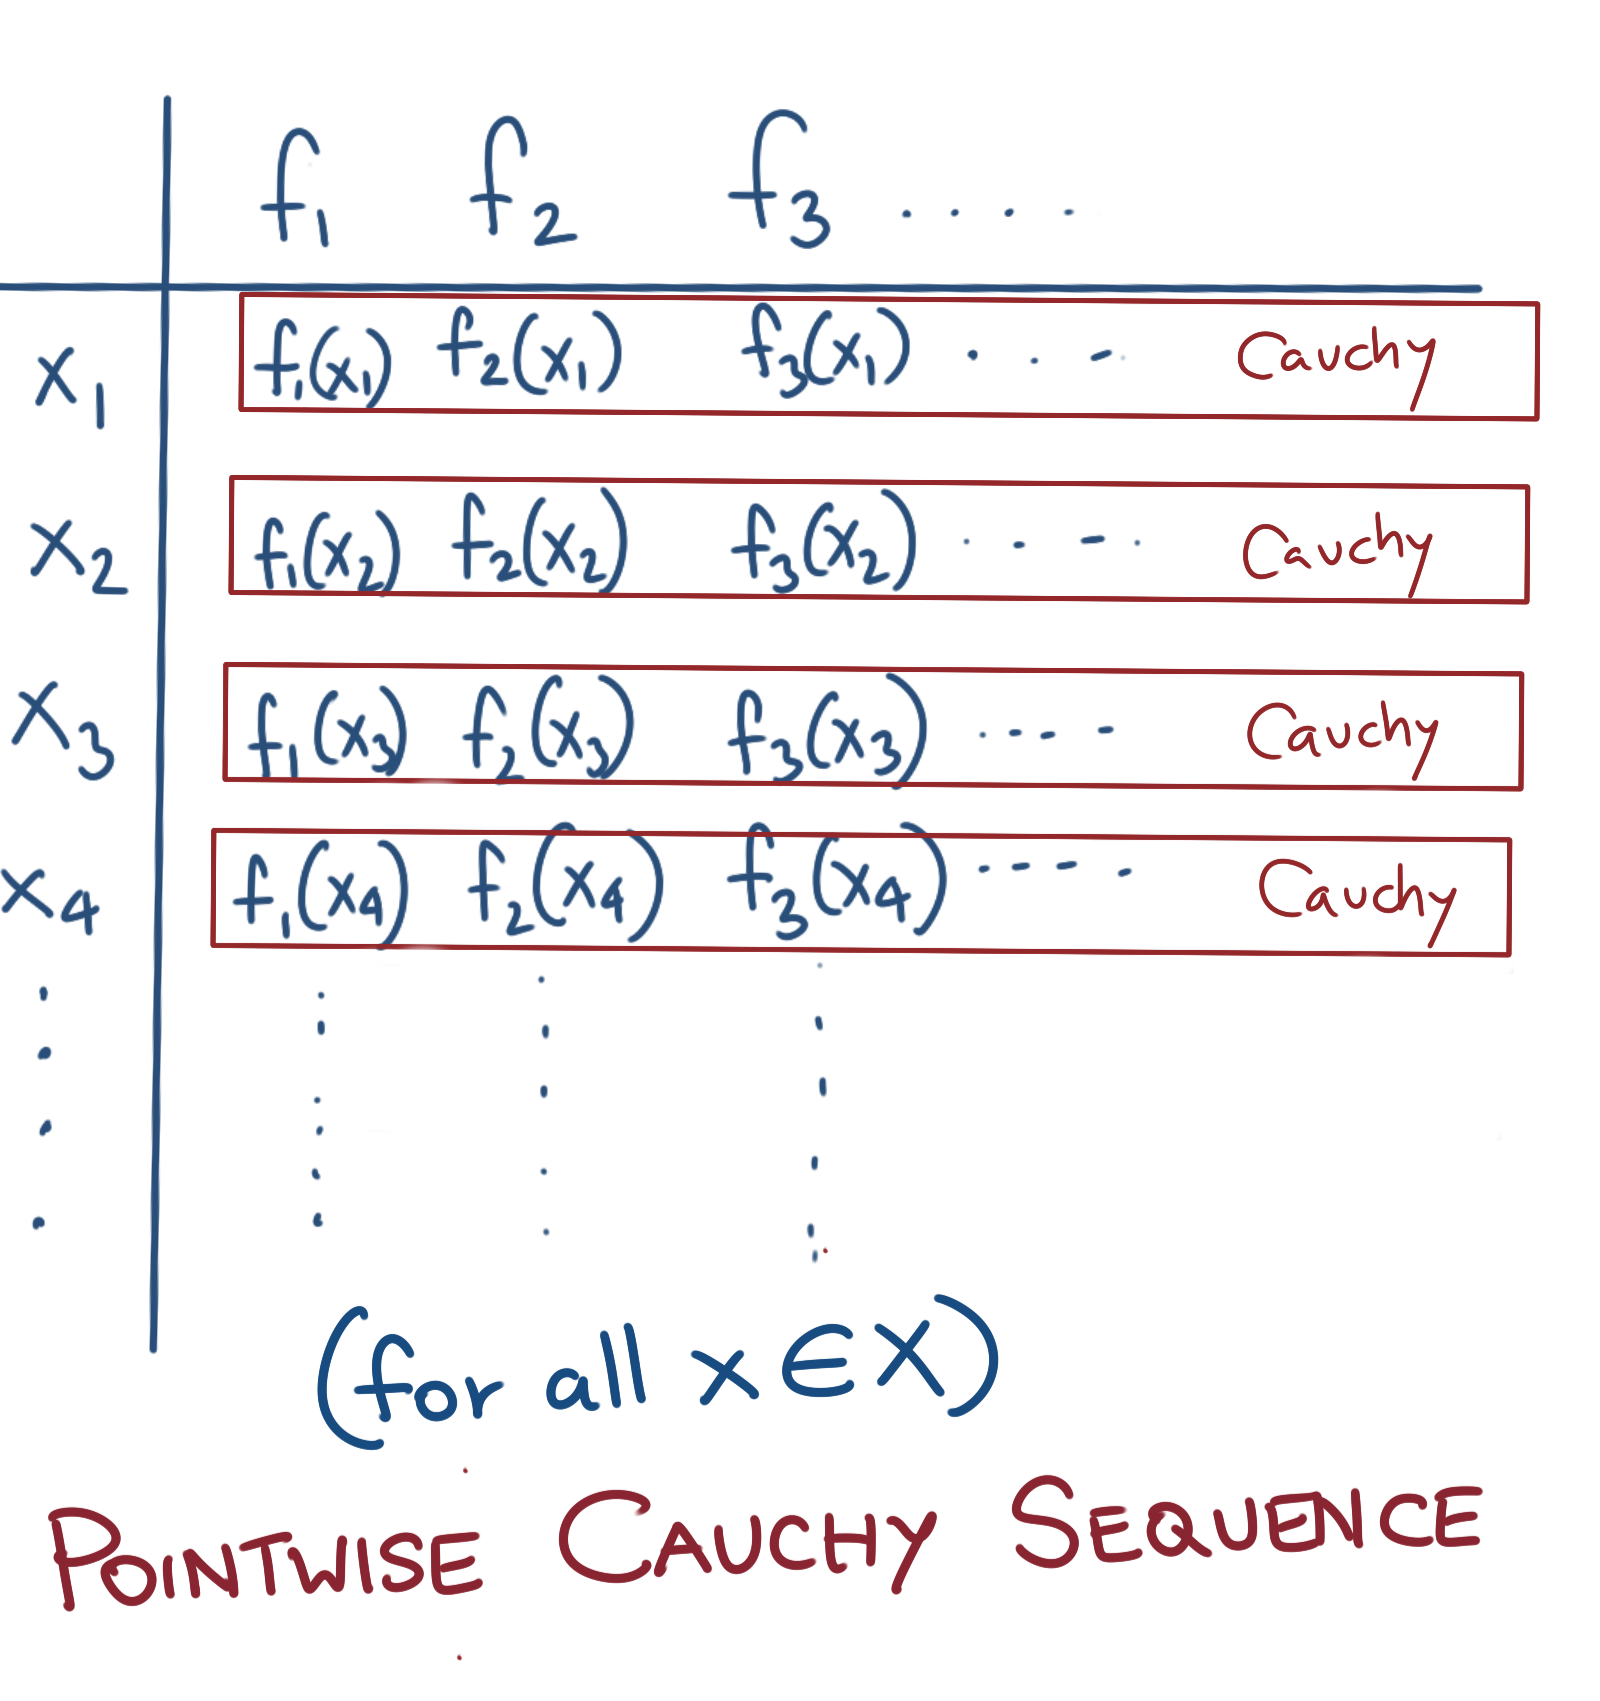 Pointwise Cauchy Sequence of Functions